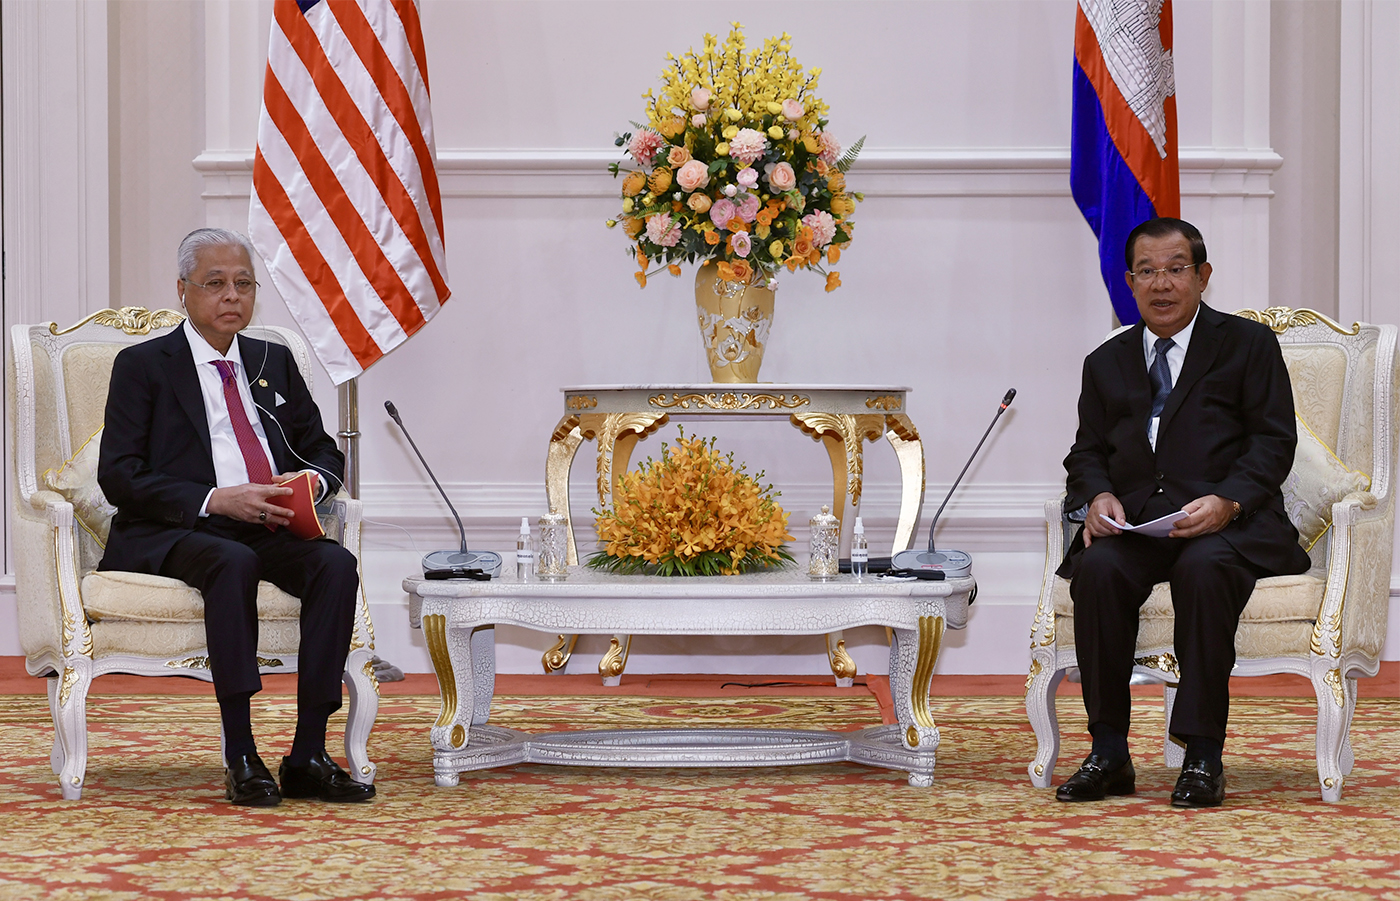  Cambodia's Prime Minister Hun Sen (R) and Malaysia's Prime Minister Ismail Sabri Yaakob attend a meeting at the Peace Palace in Phnom Penh, February 24, 2022. Kok KY / Handout photo